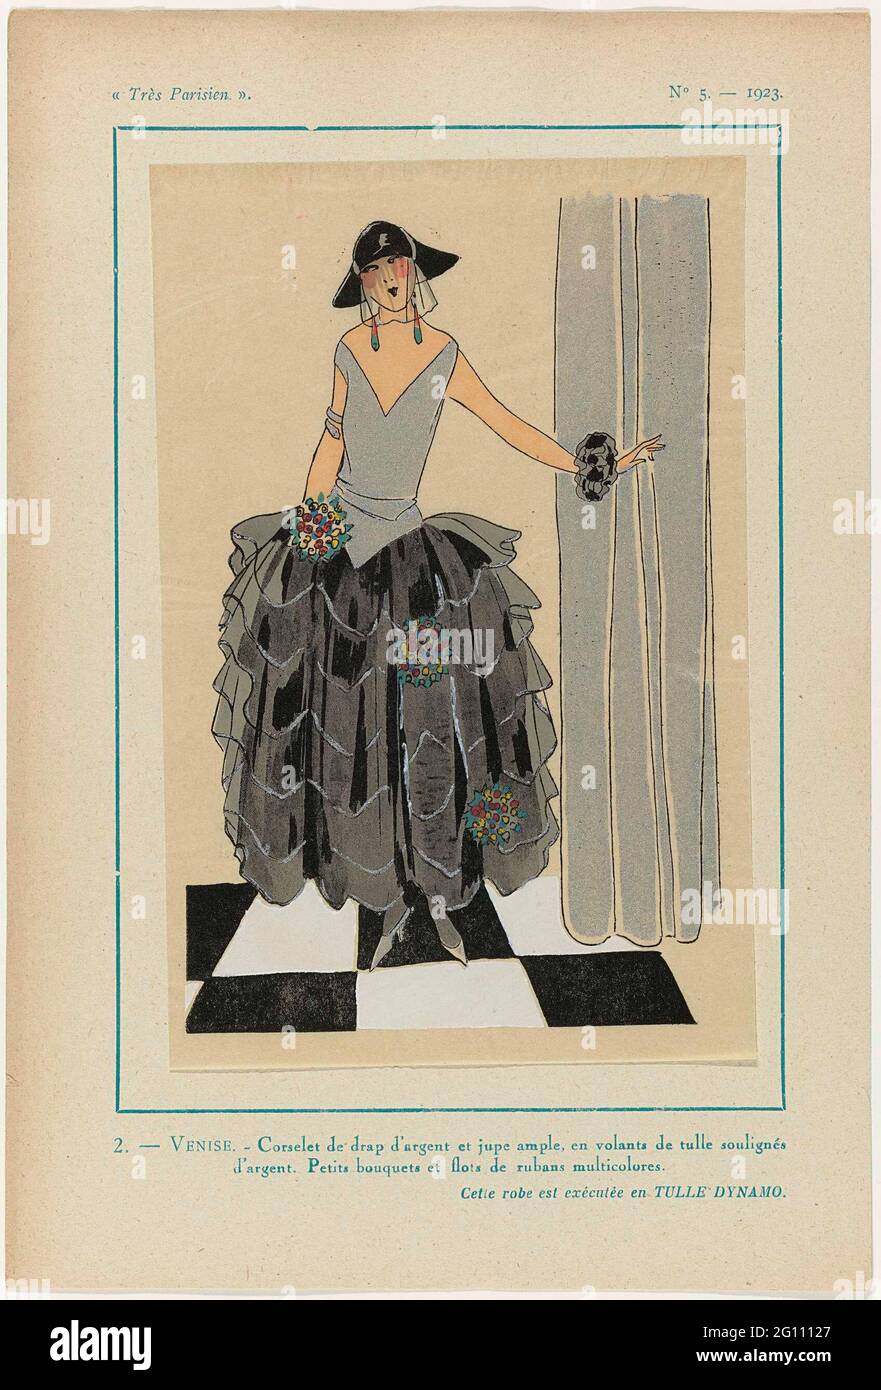 Très Parisien, 1923, No 5: 2. - Venise. - Corselet De Dap d'Argent ....  Bodice of silver towel and a wide skirt consisting of volants of tulle off  with silver. Small bouquets